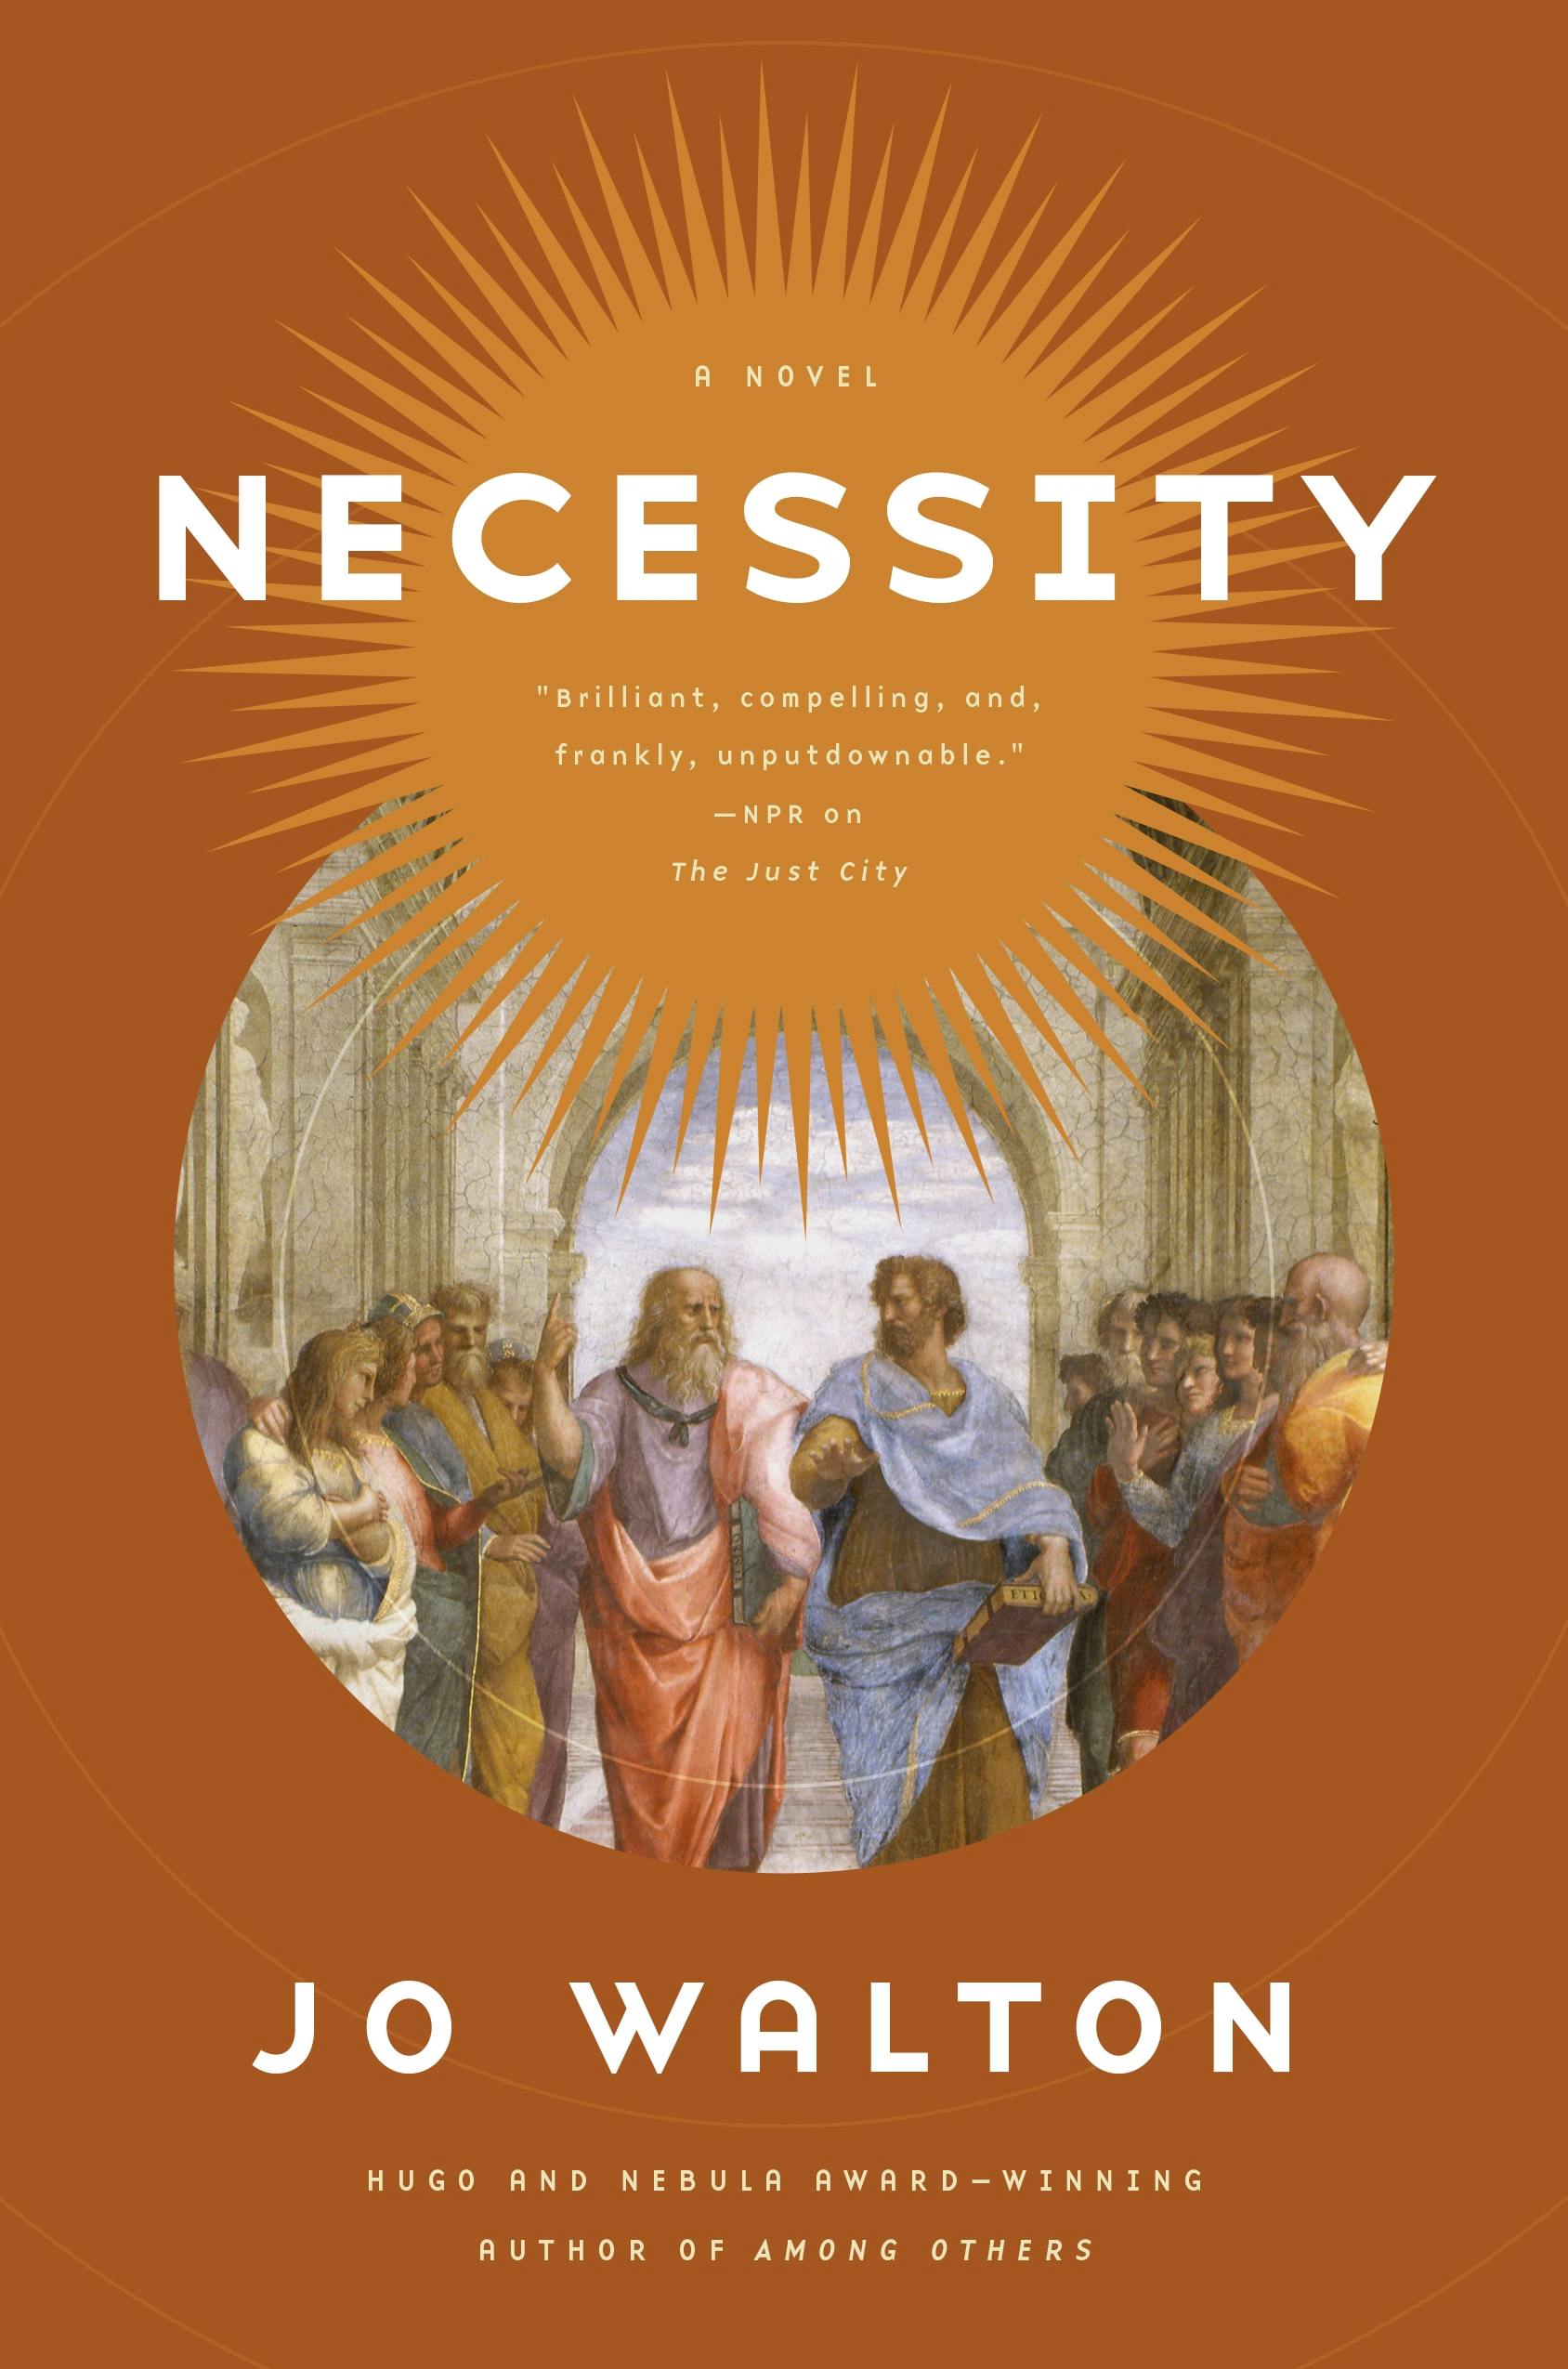 Cover for the book titled as: Necessity